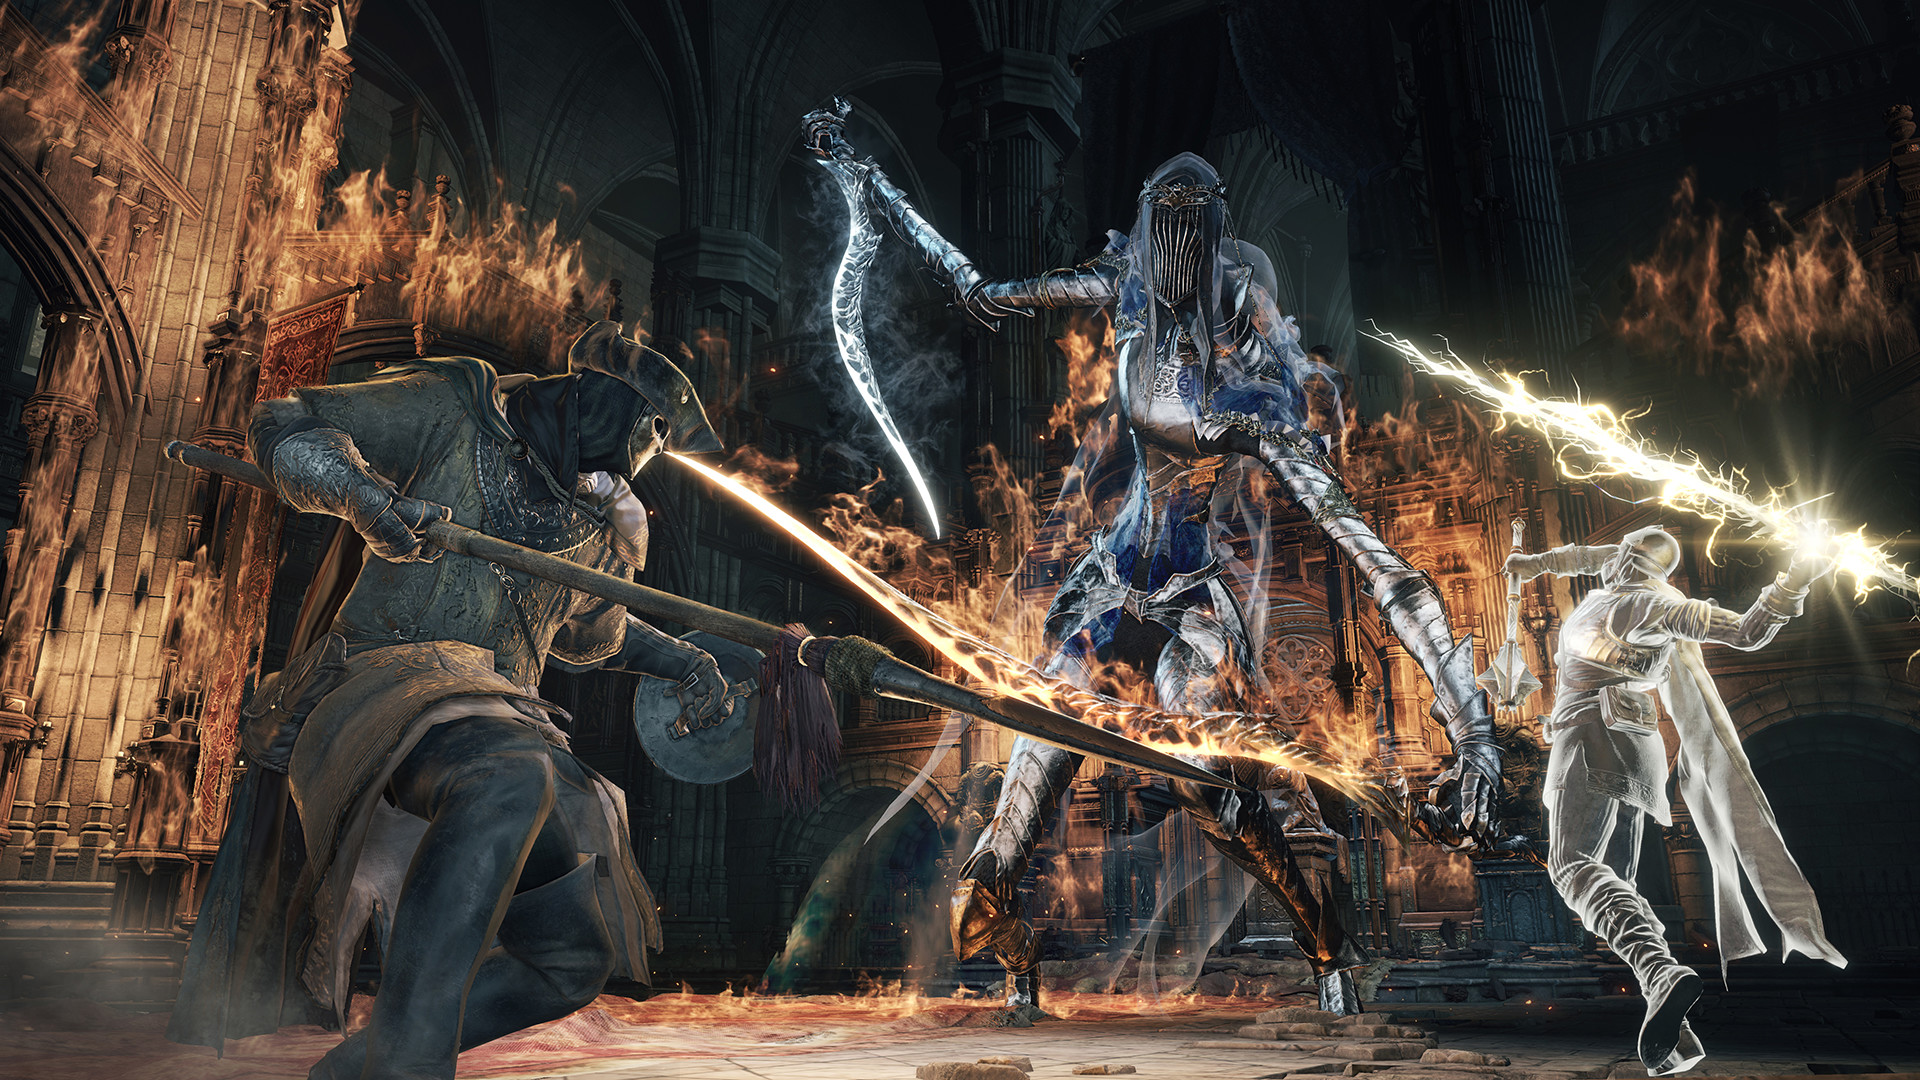 FromSoftware Says Developing Hard Games Is Its Identity